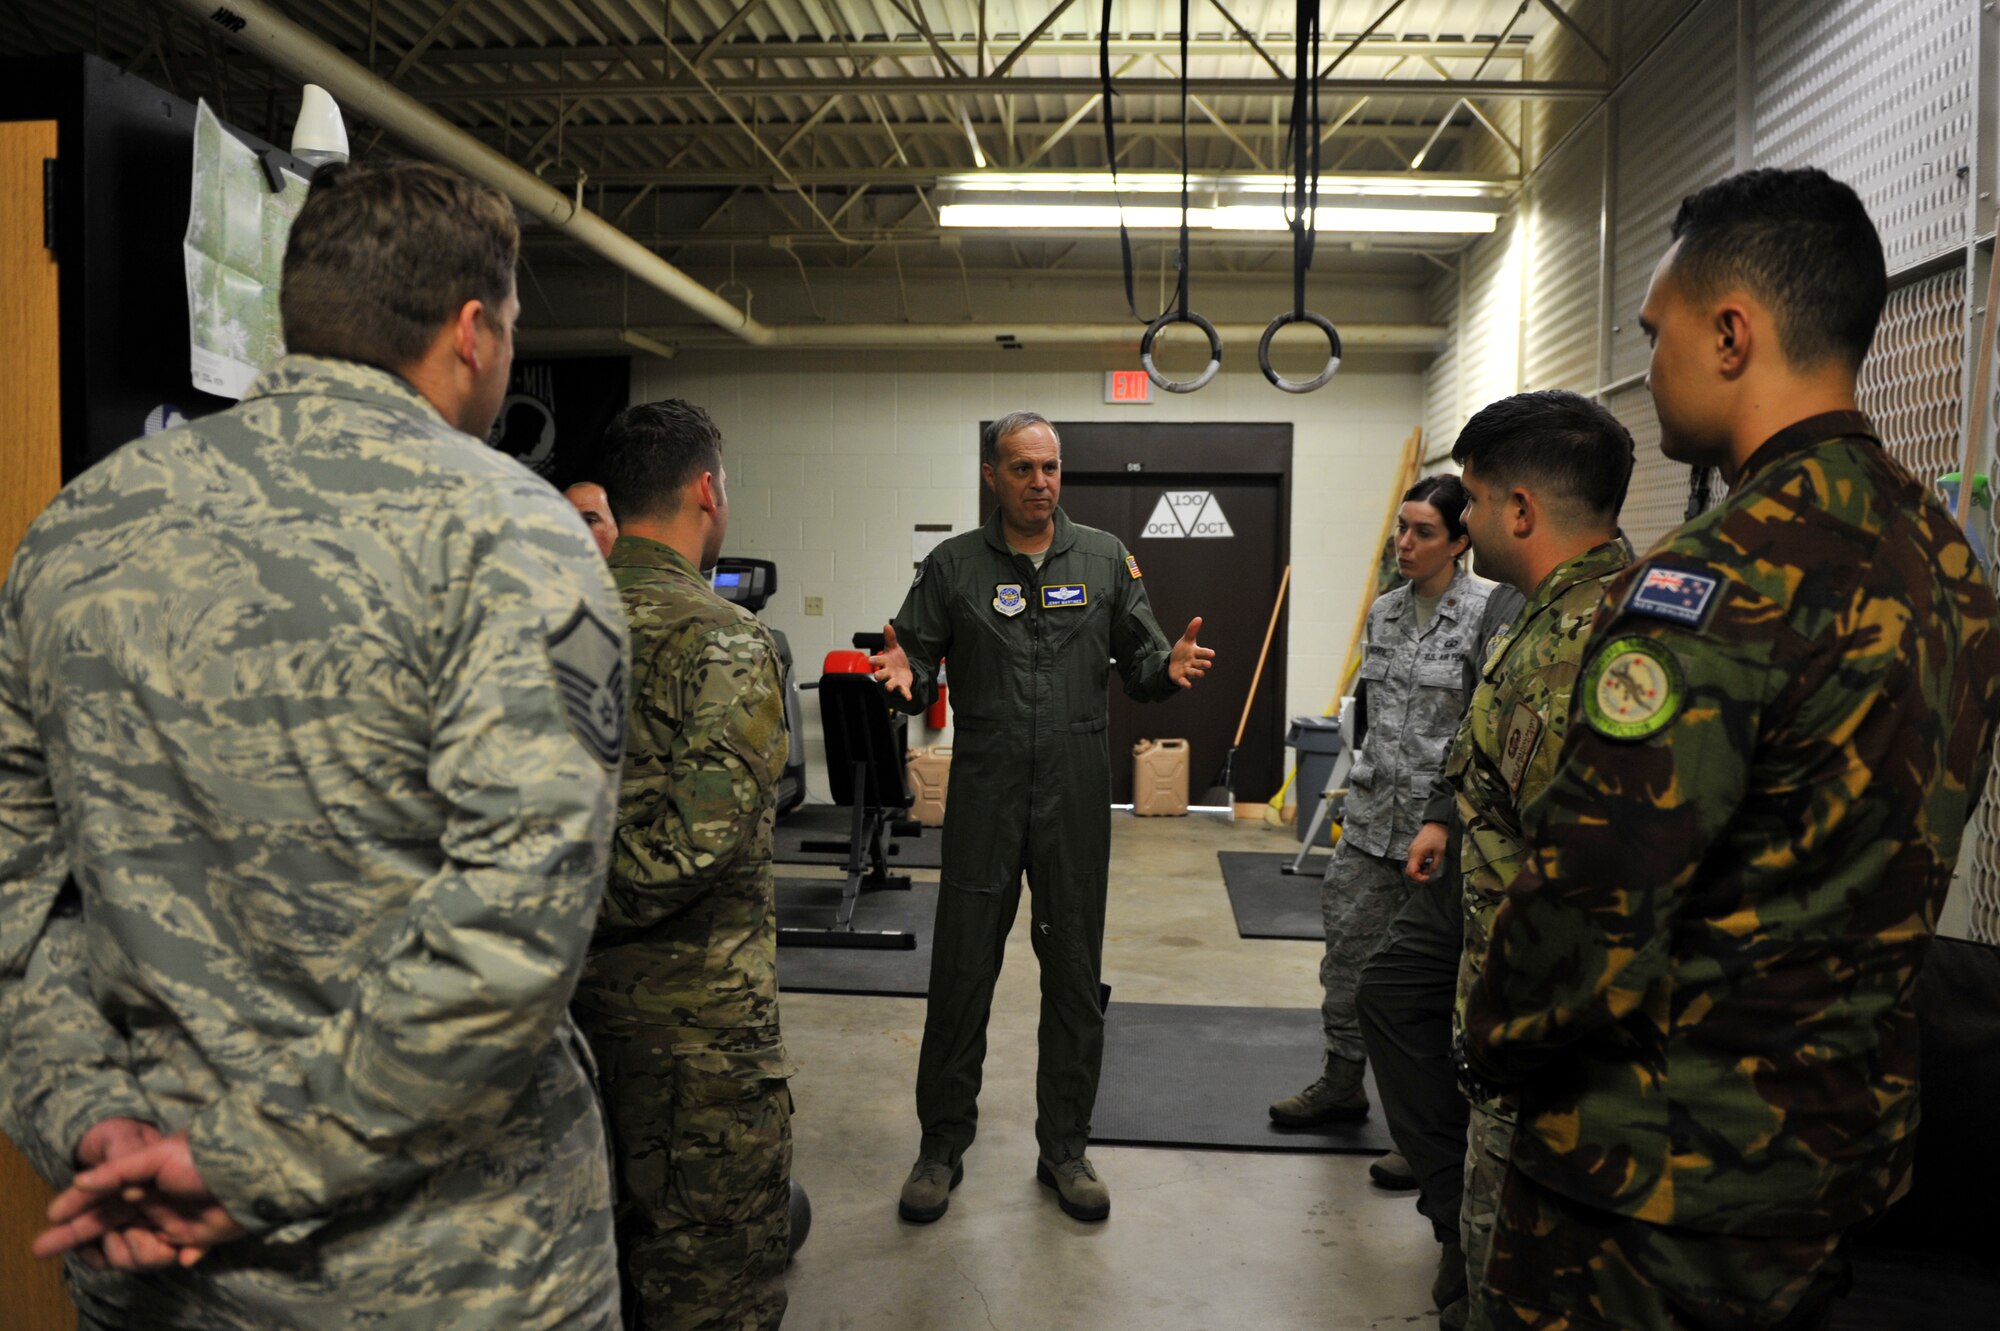 U.S. Air Force Maj. Gen. Jerry Martinez, Air Mobility Command Director of Operations, meets with SERE specialist from Little Rock Air Force Base, Ark. and New Zealand, April 18, 2016, at Fort Polk, La., during Green Flag 16-06.  The Royal Australian Air Force, Royal New Zealand Air Force and U.S. Air Force train during Green Flag Little Rock to ensure all aircrew can effectively communicate. (U.S. Air Force photo by Staff Sgt. Jeremy McGuffin)